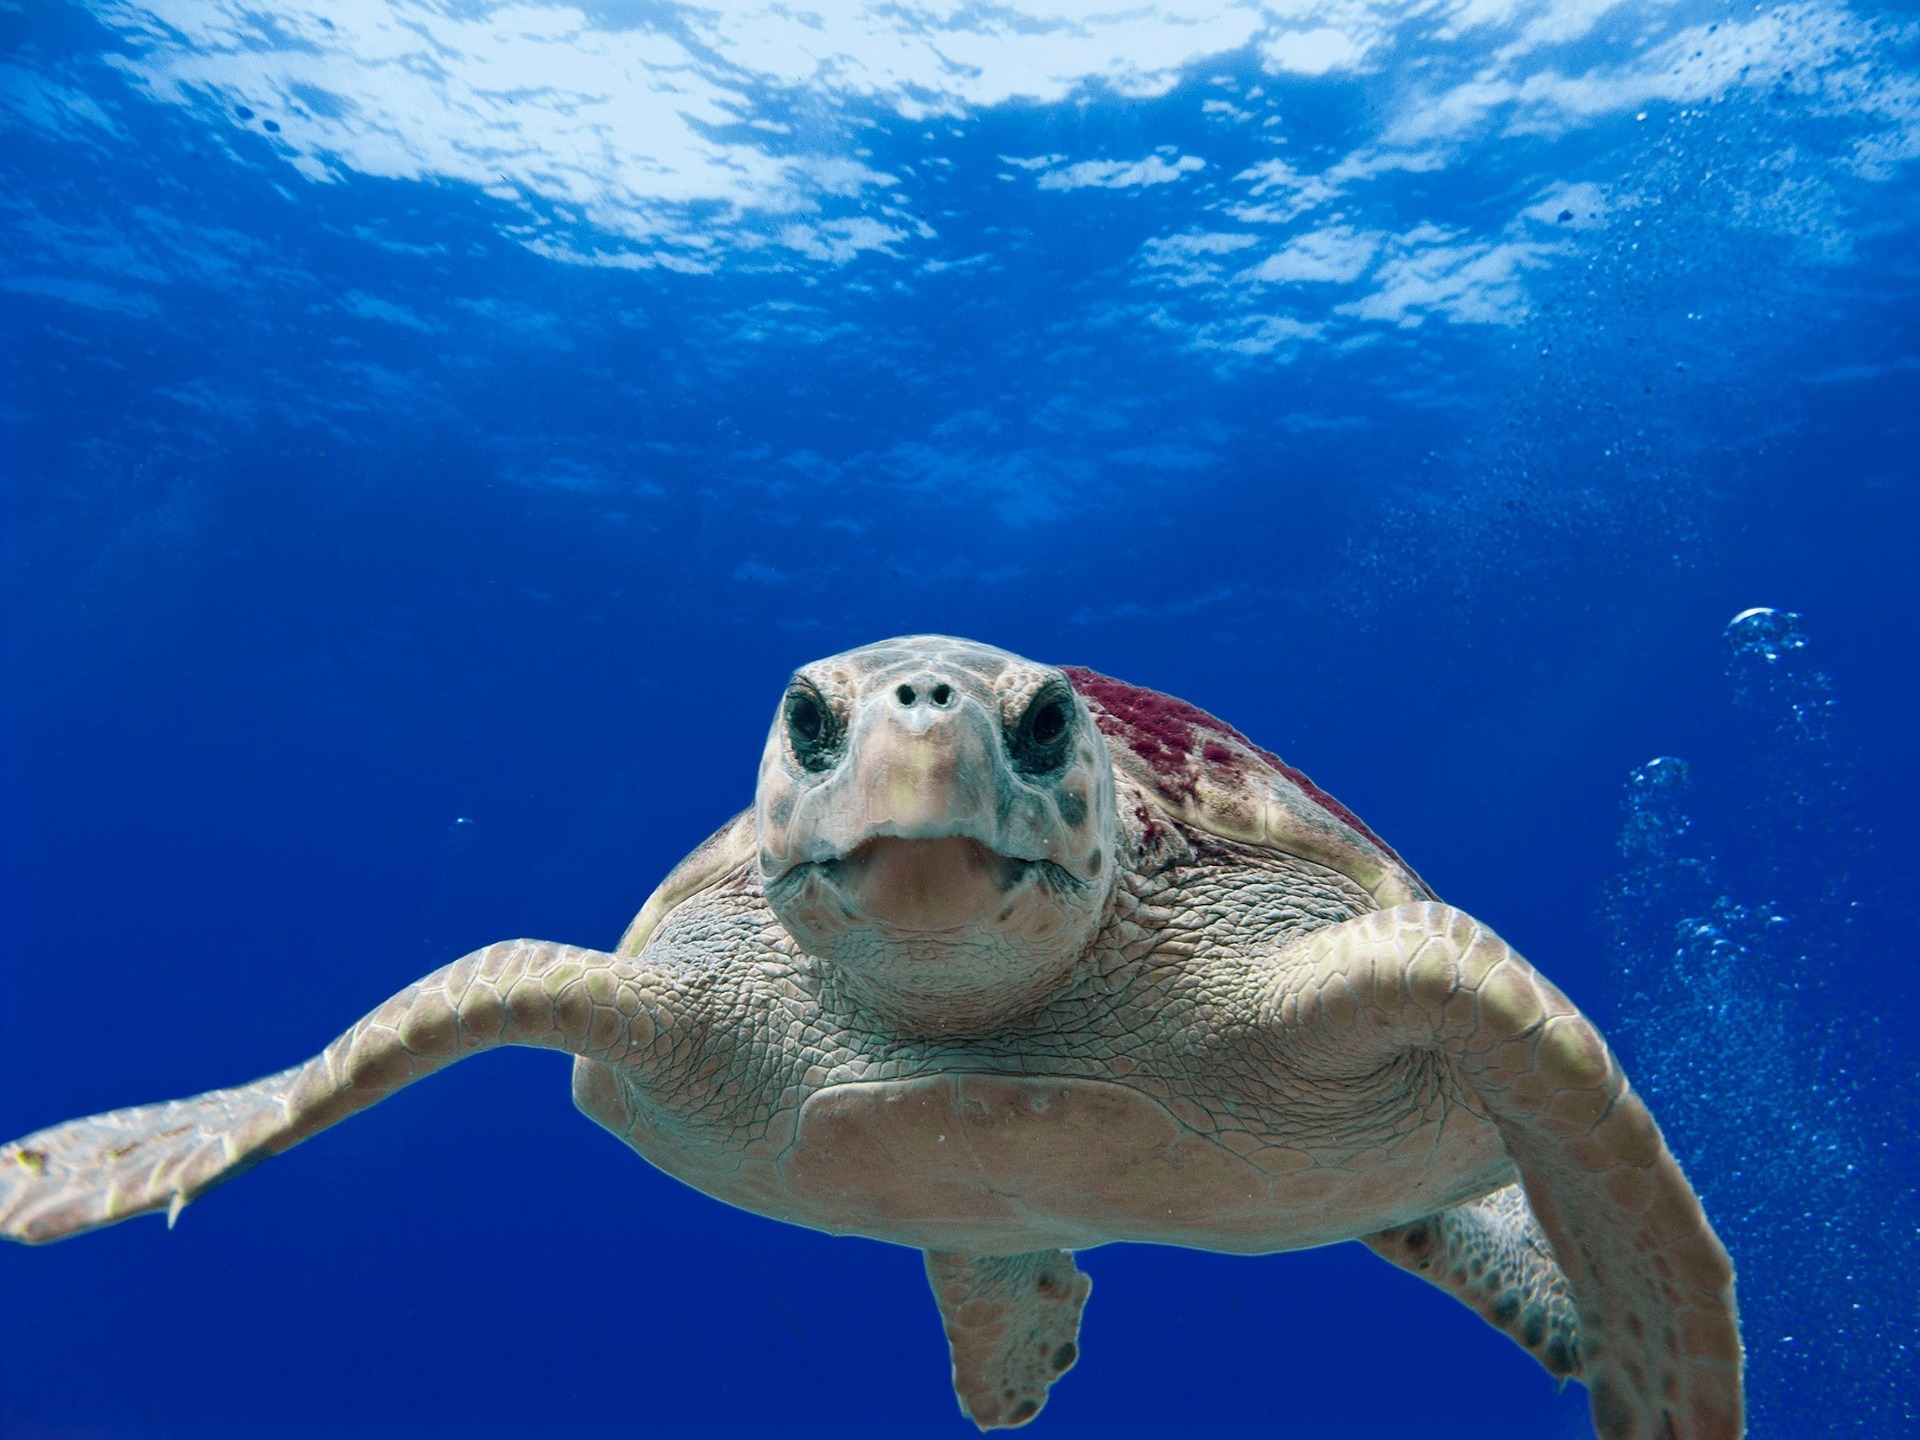 A sea turtle swimming in the ocean.